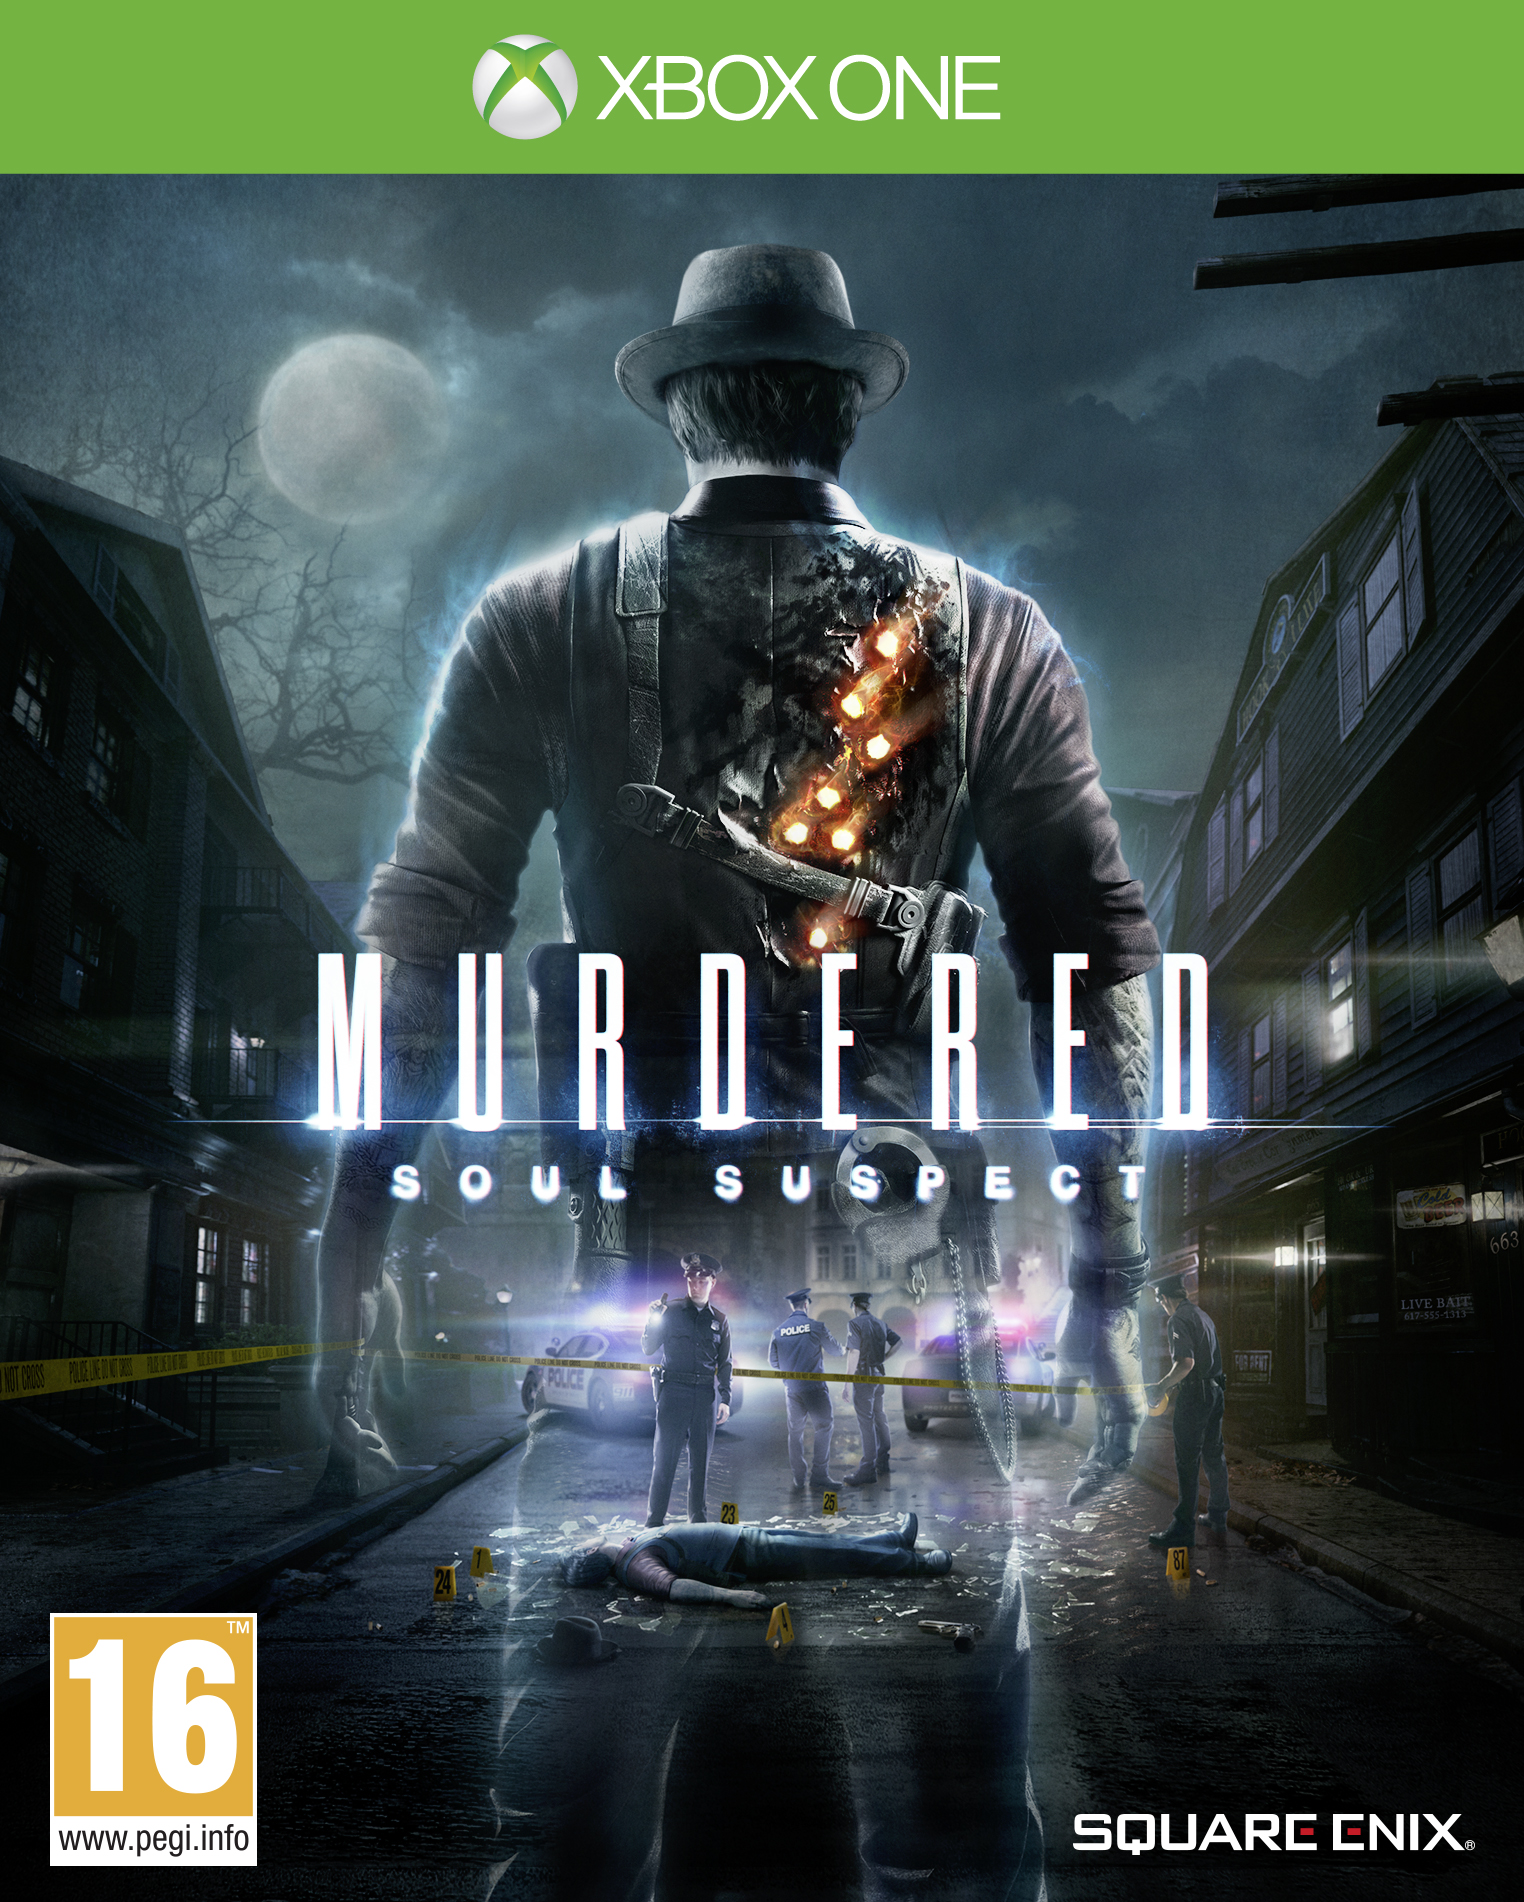 Murdered: Soul Suspect /Xbox One